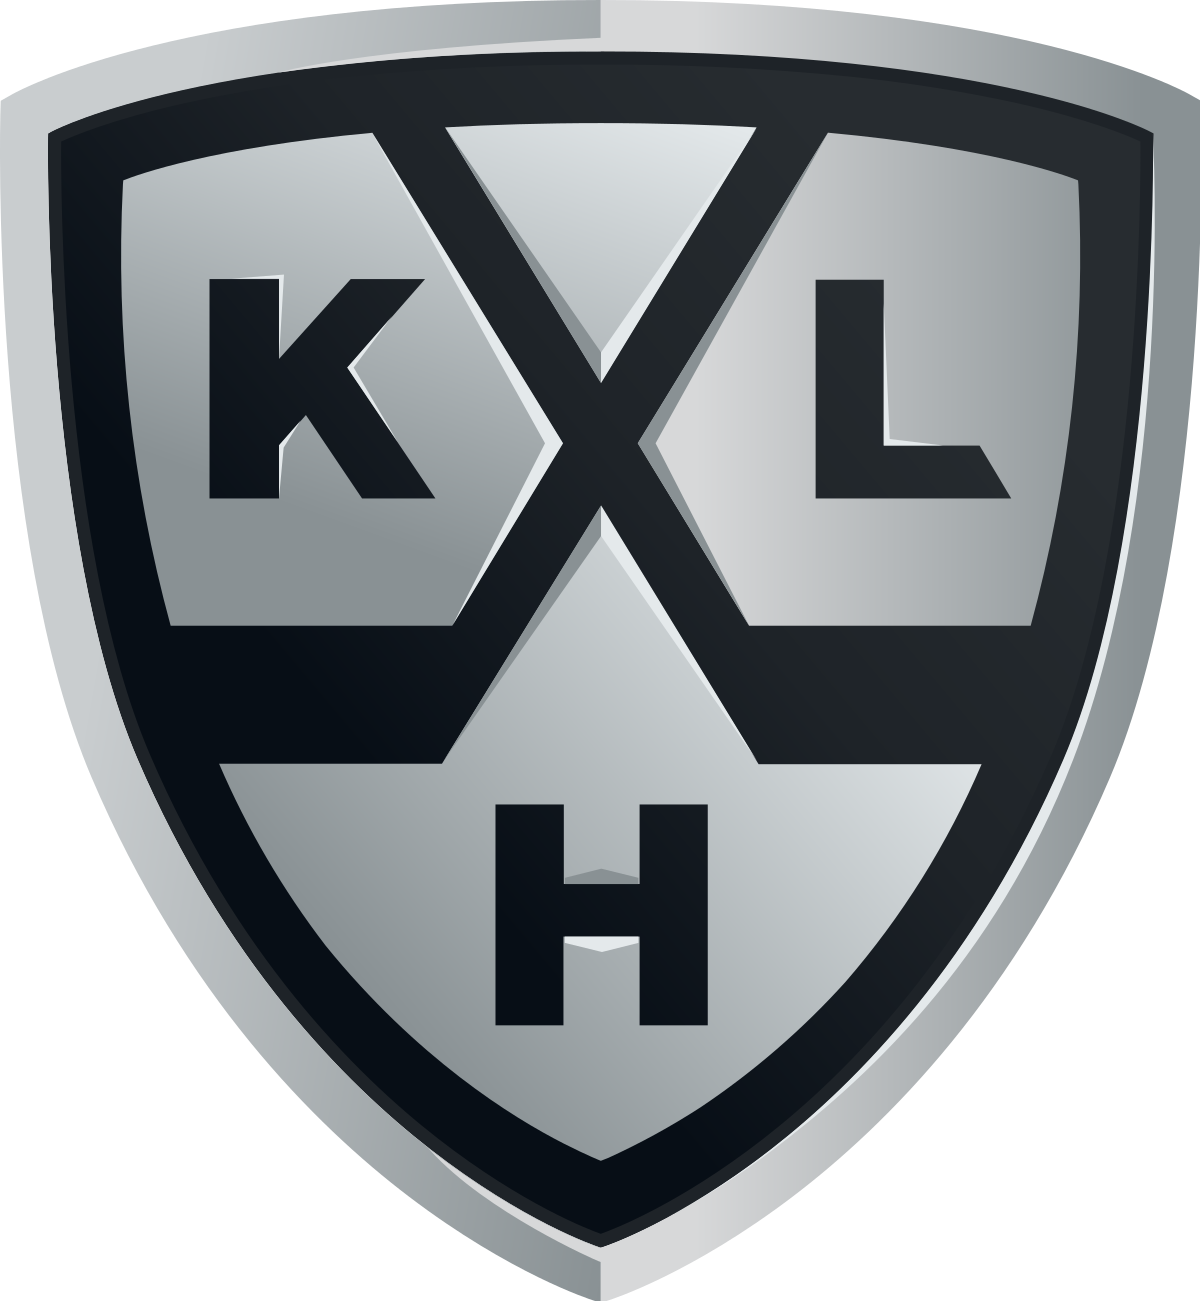 KHL have been looking to cut costs in a bid to make the competition more commercially viable ©Wikipedia